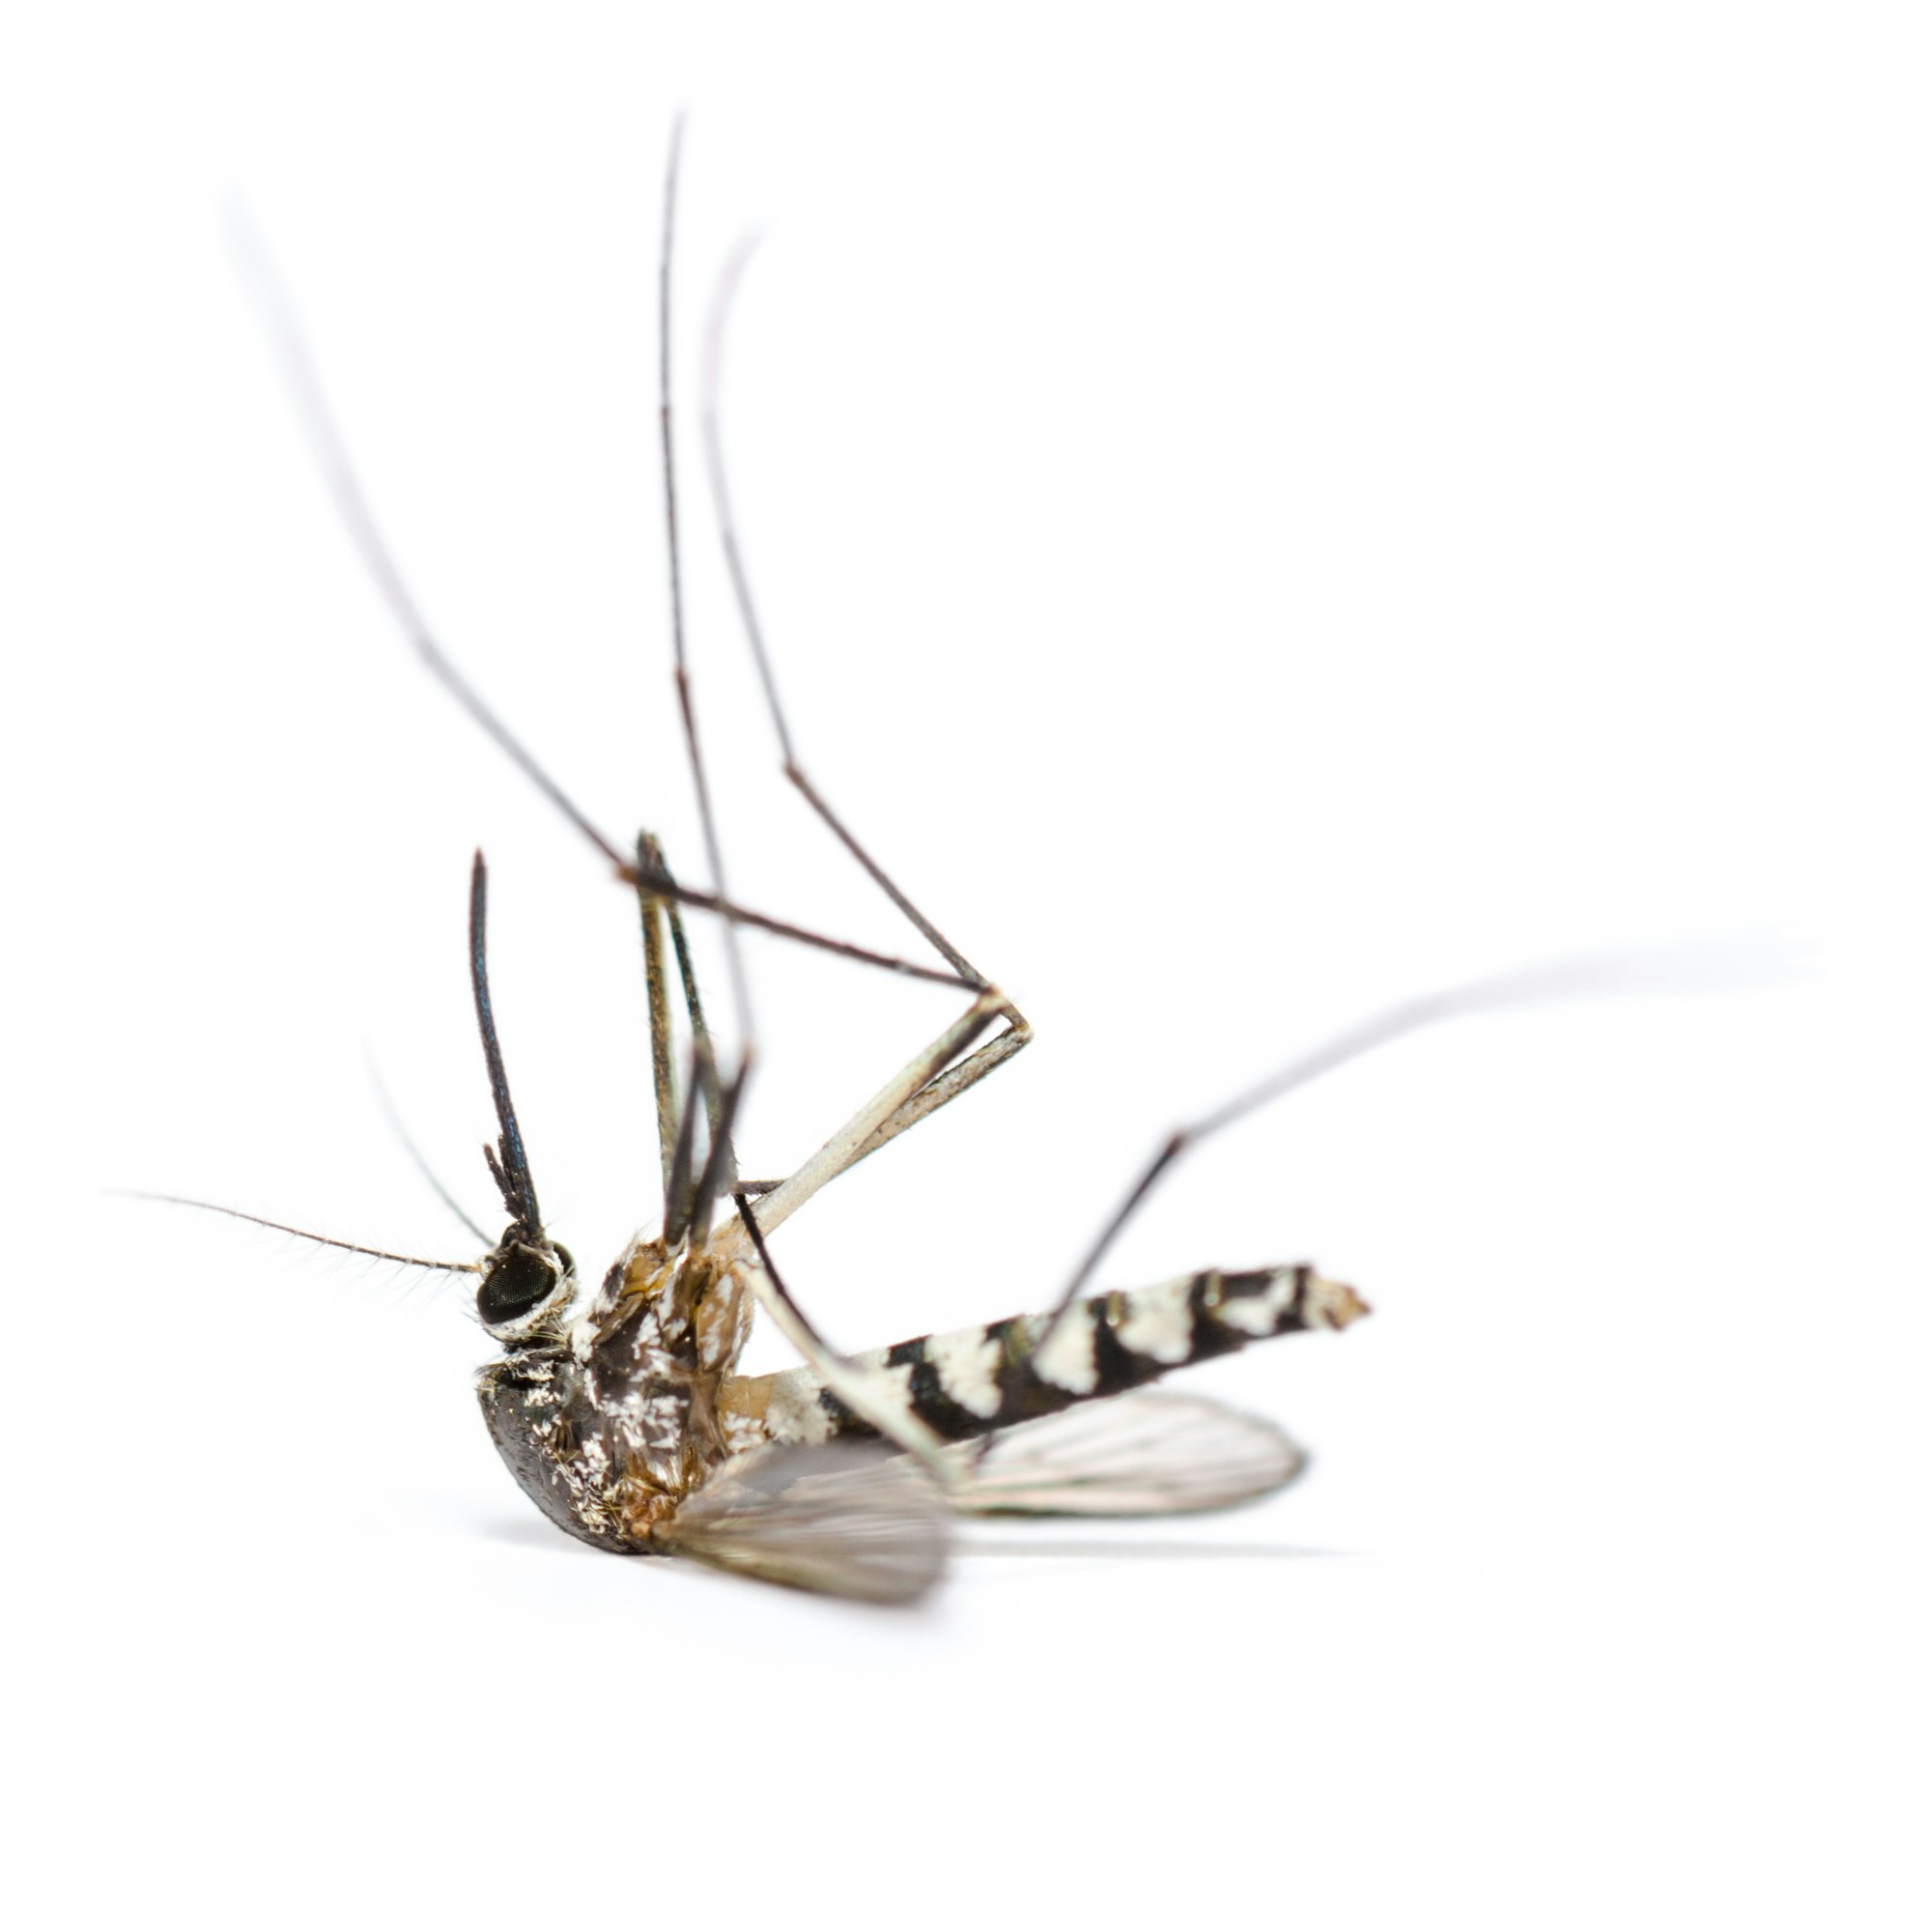 Dead mosquito isolated on white background